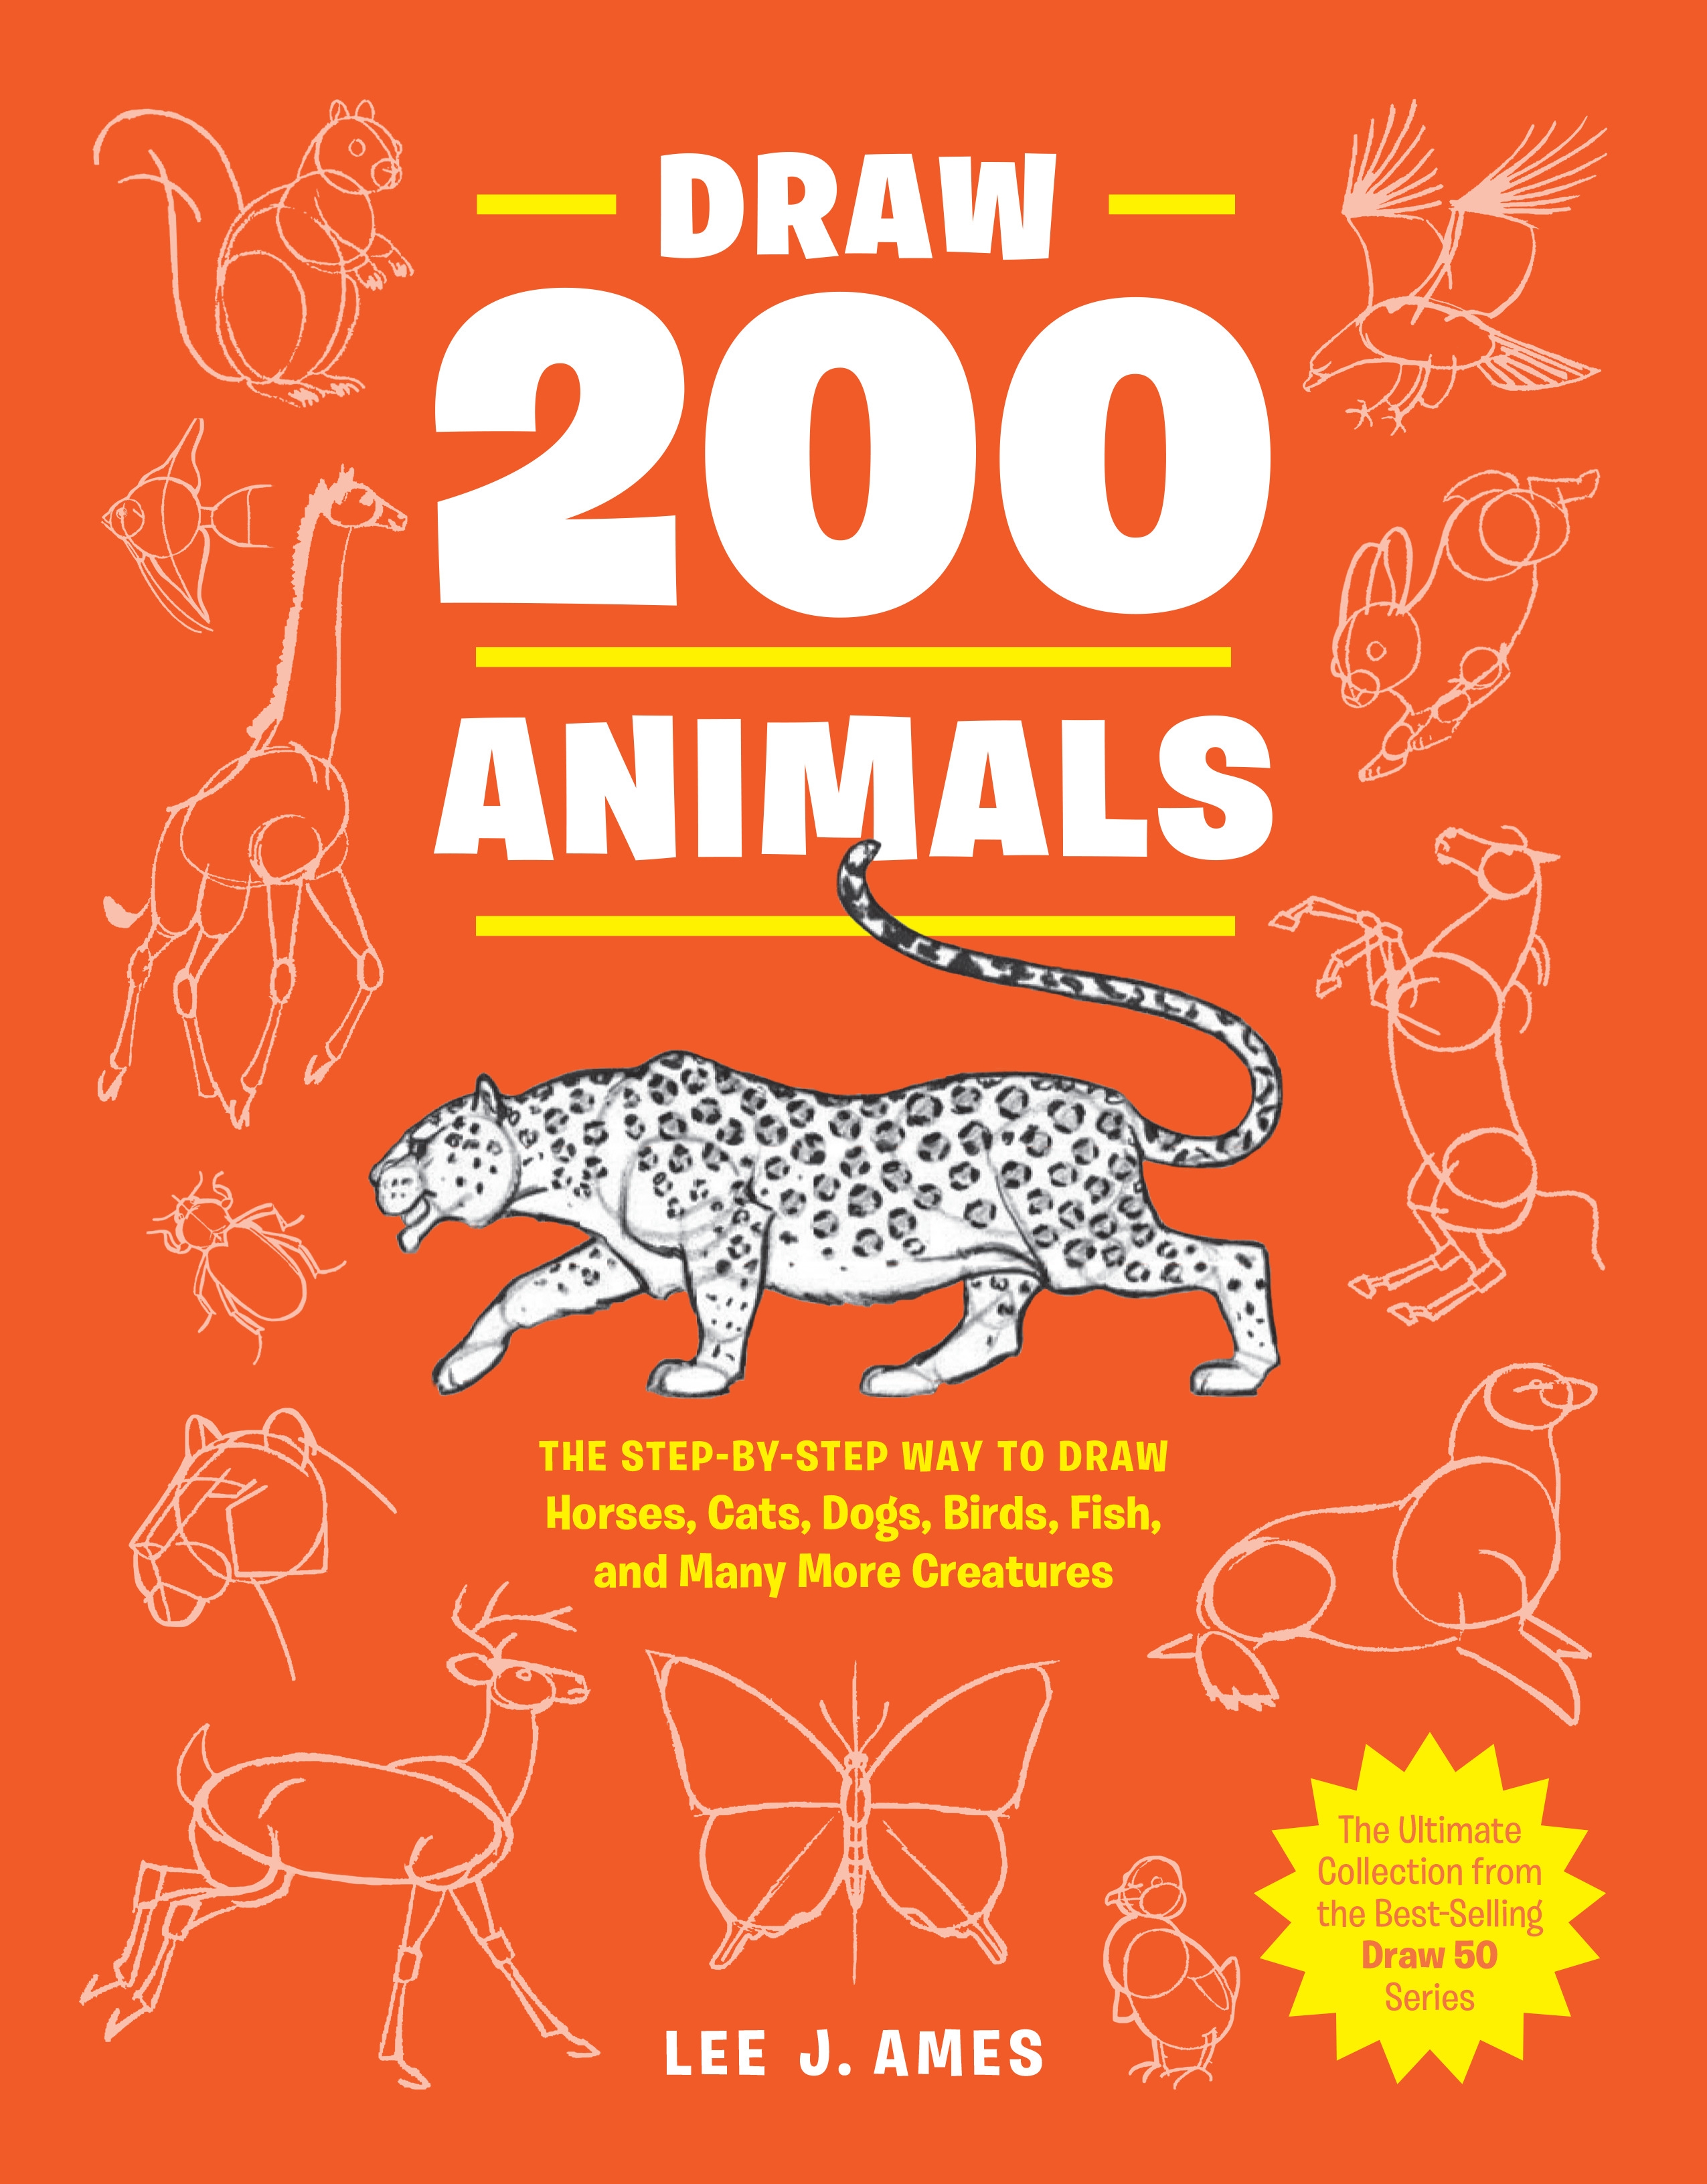 Draw 200 Animals by Lee J. Ames - Penguin Books New Zealand